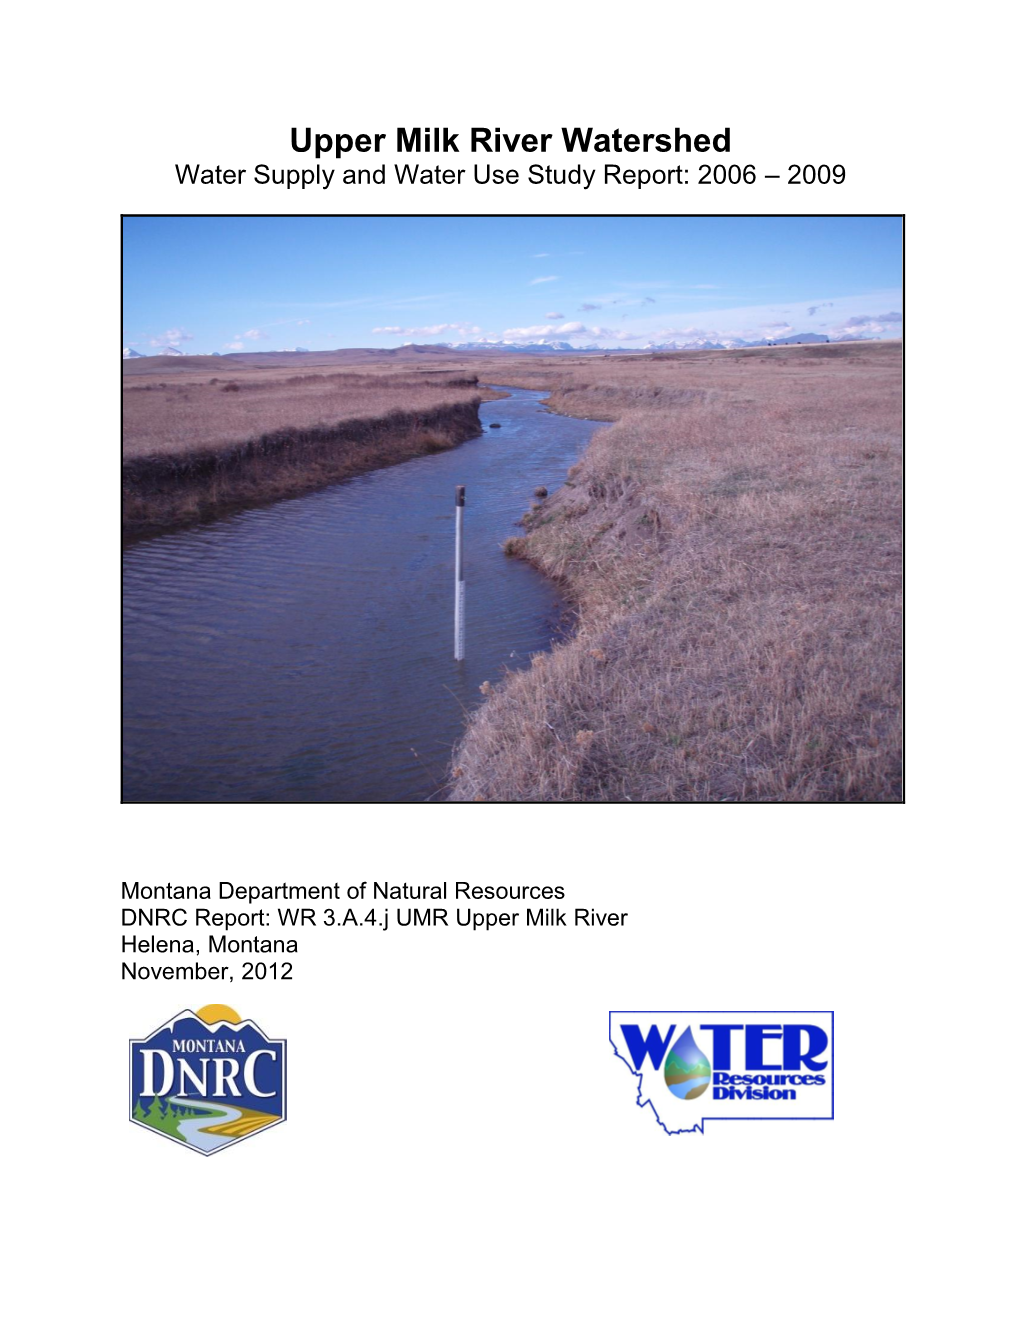 Upper Milk River Watershed Hydrology Report